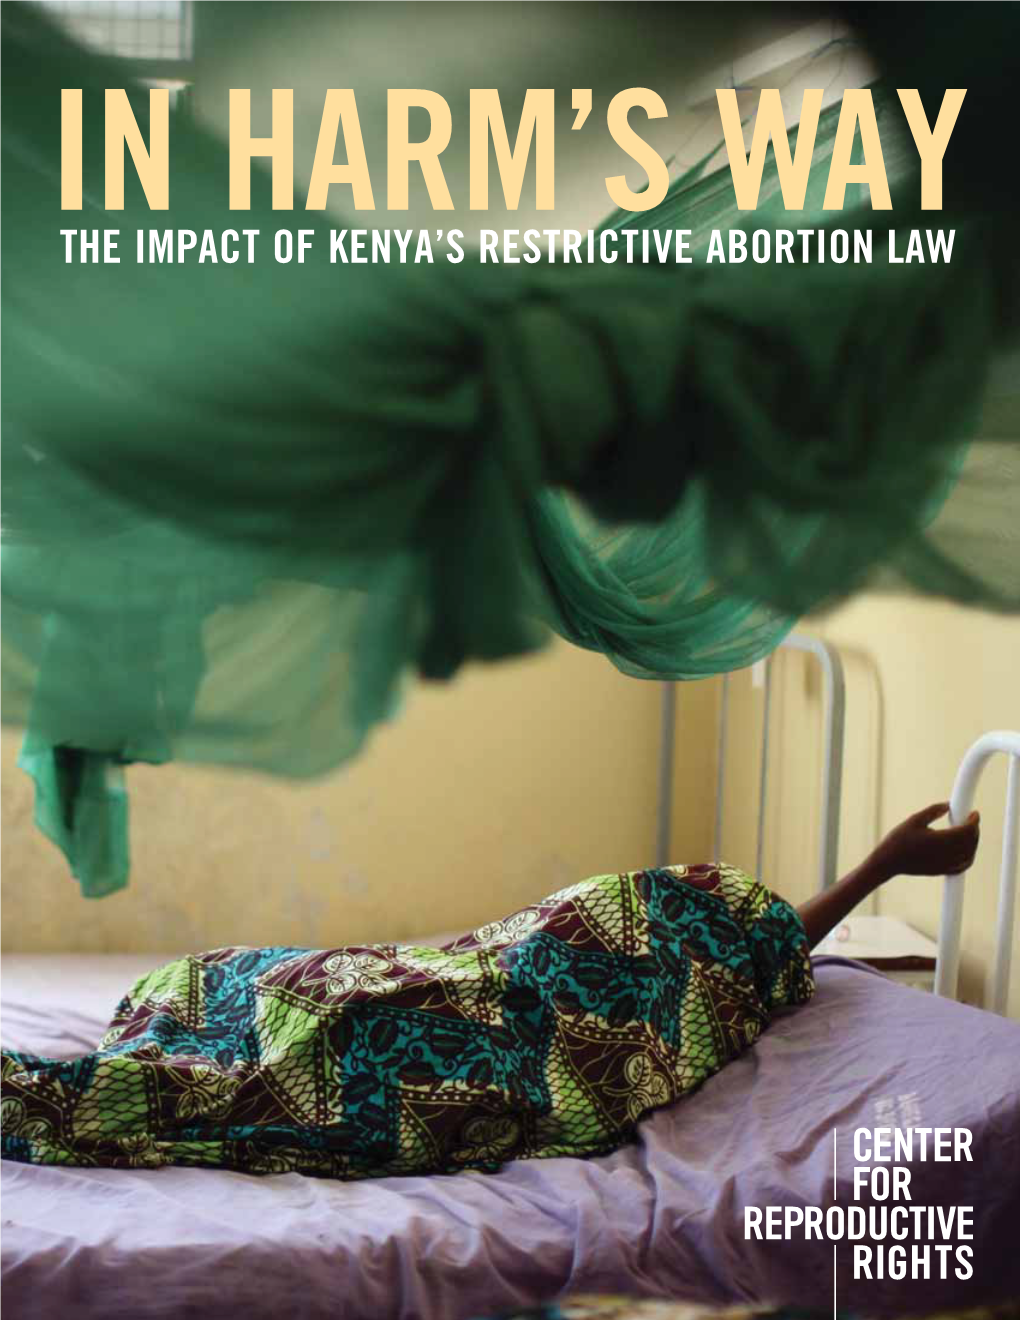 In Harm's Way: the Impact of Kenya's Restrictive Abortion